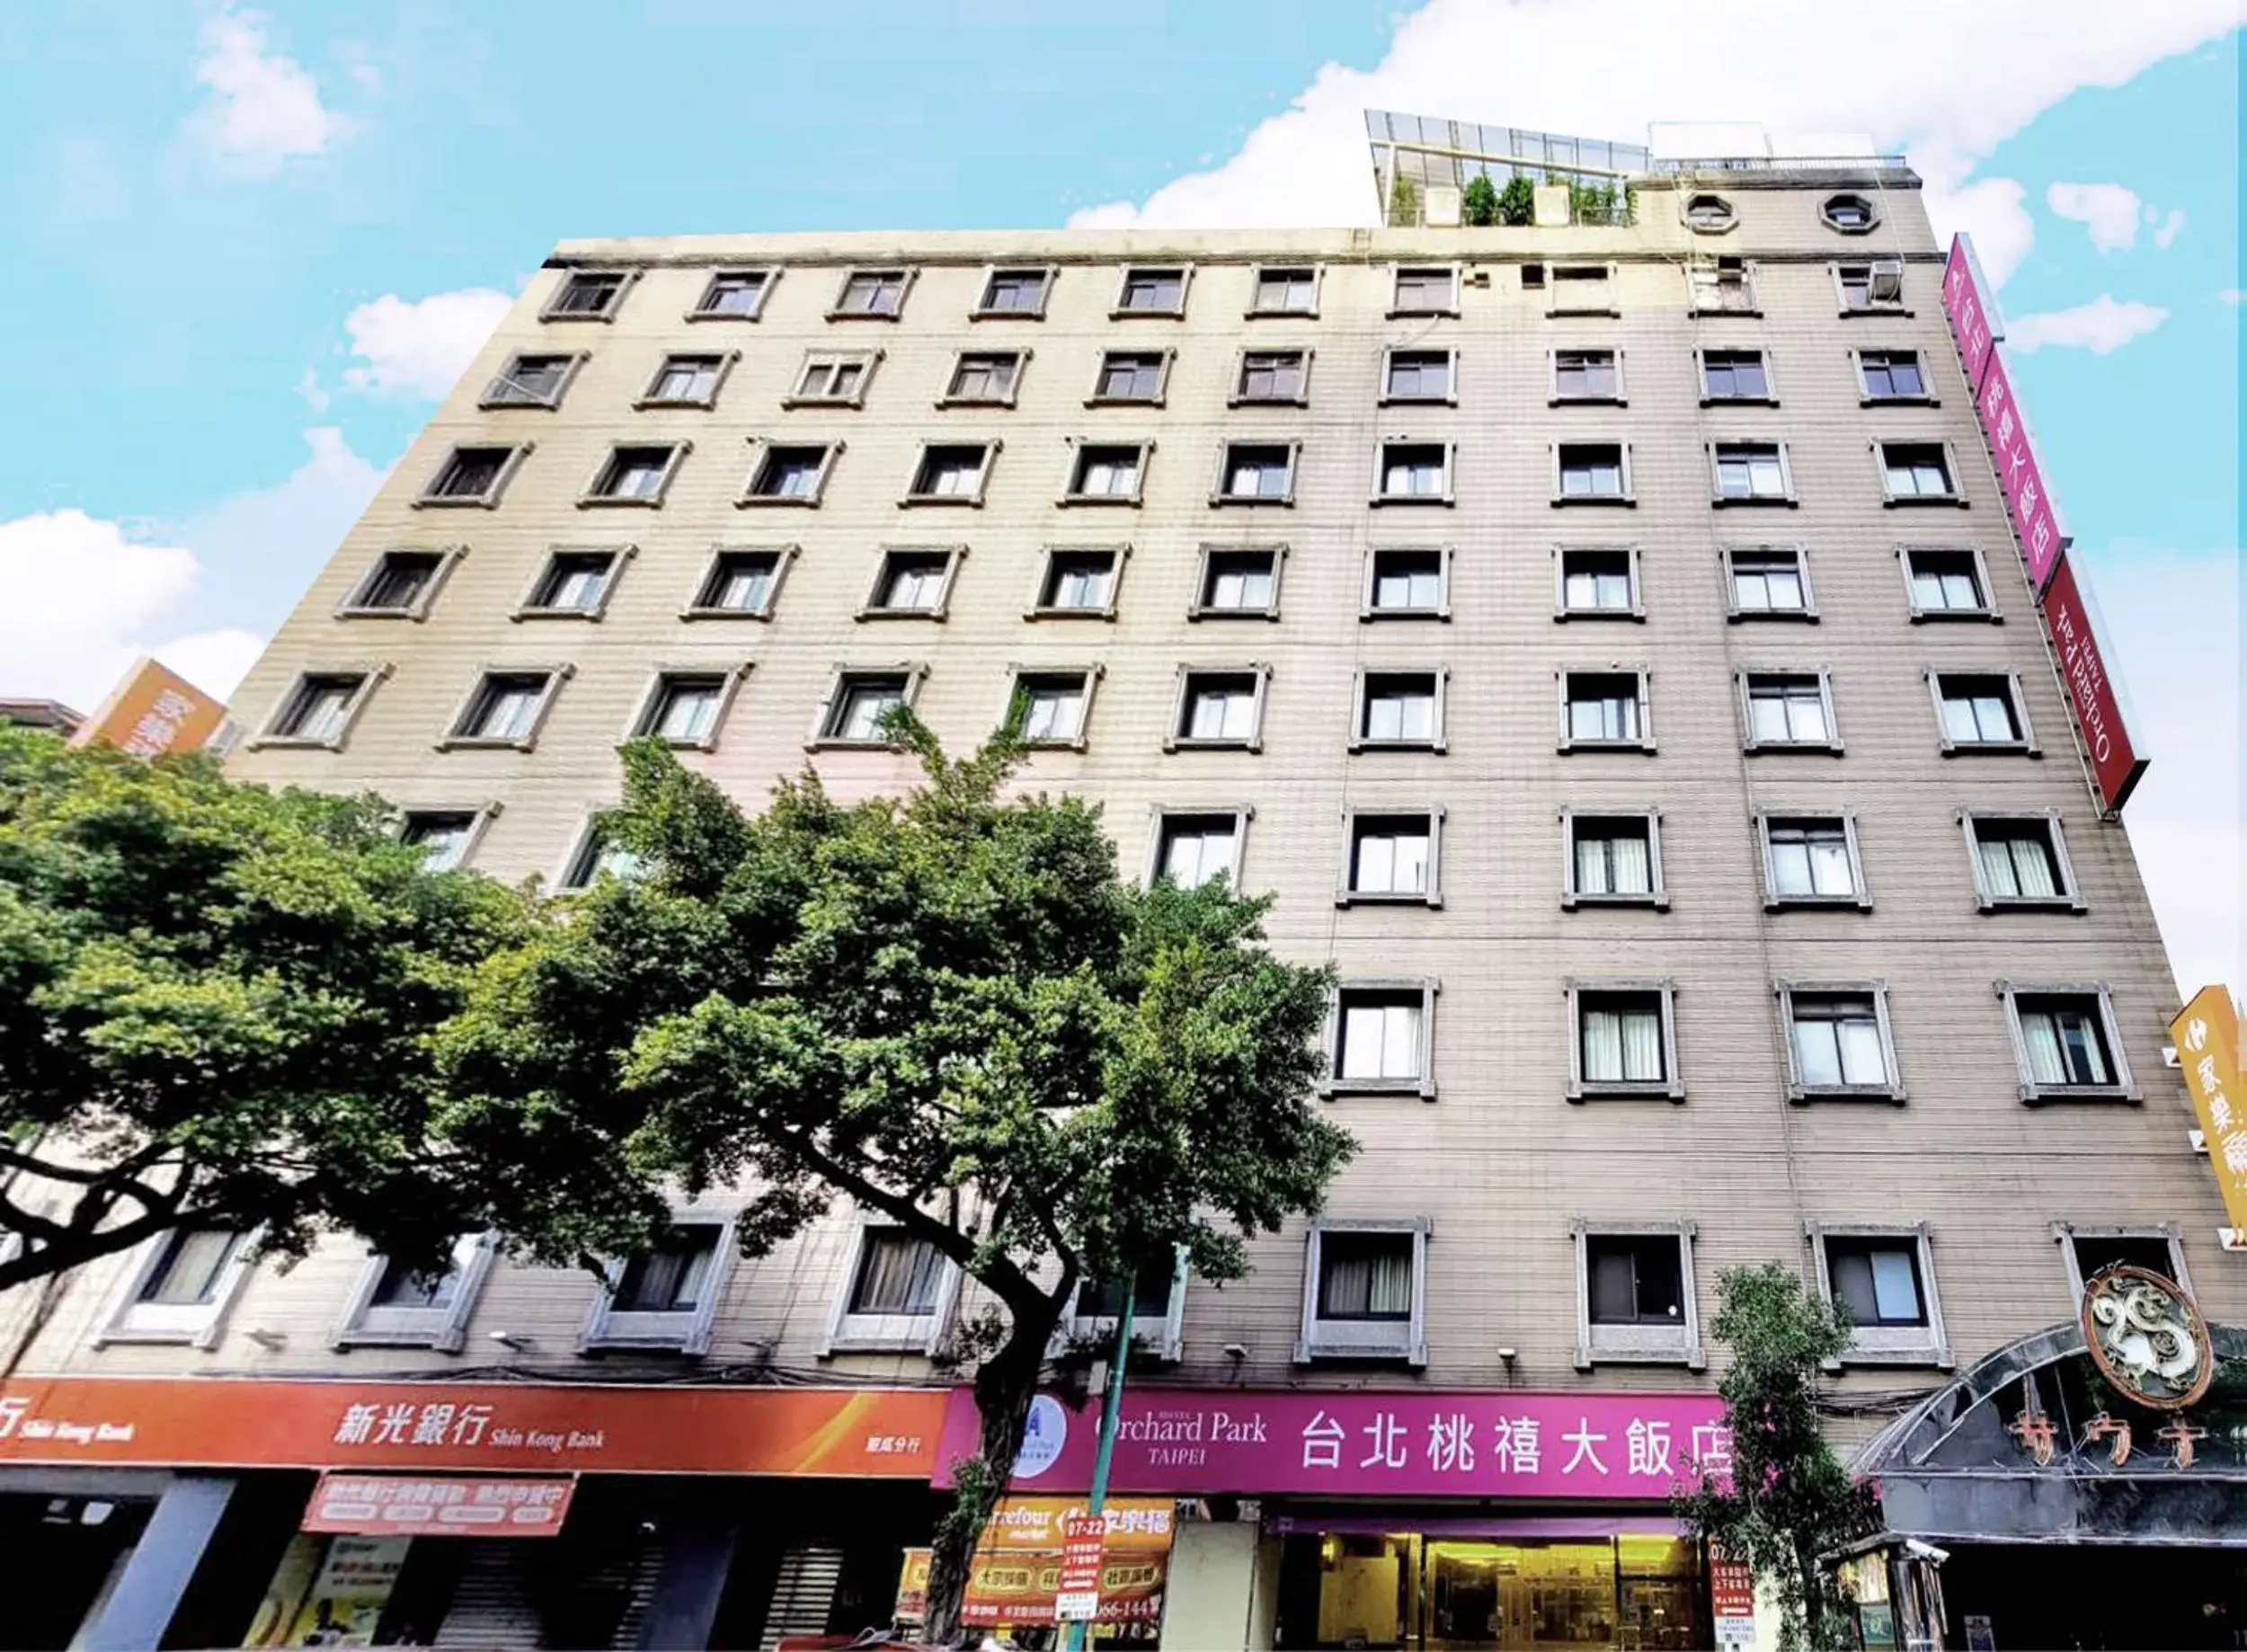 Property Building in Hotel Orchard Park - Taipei